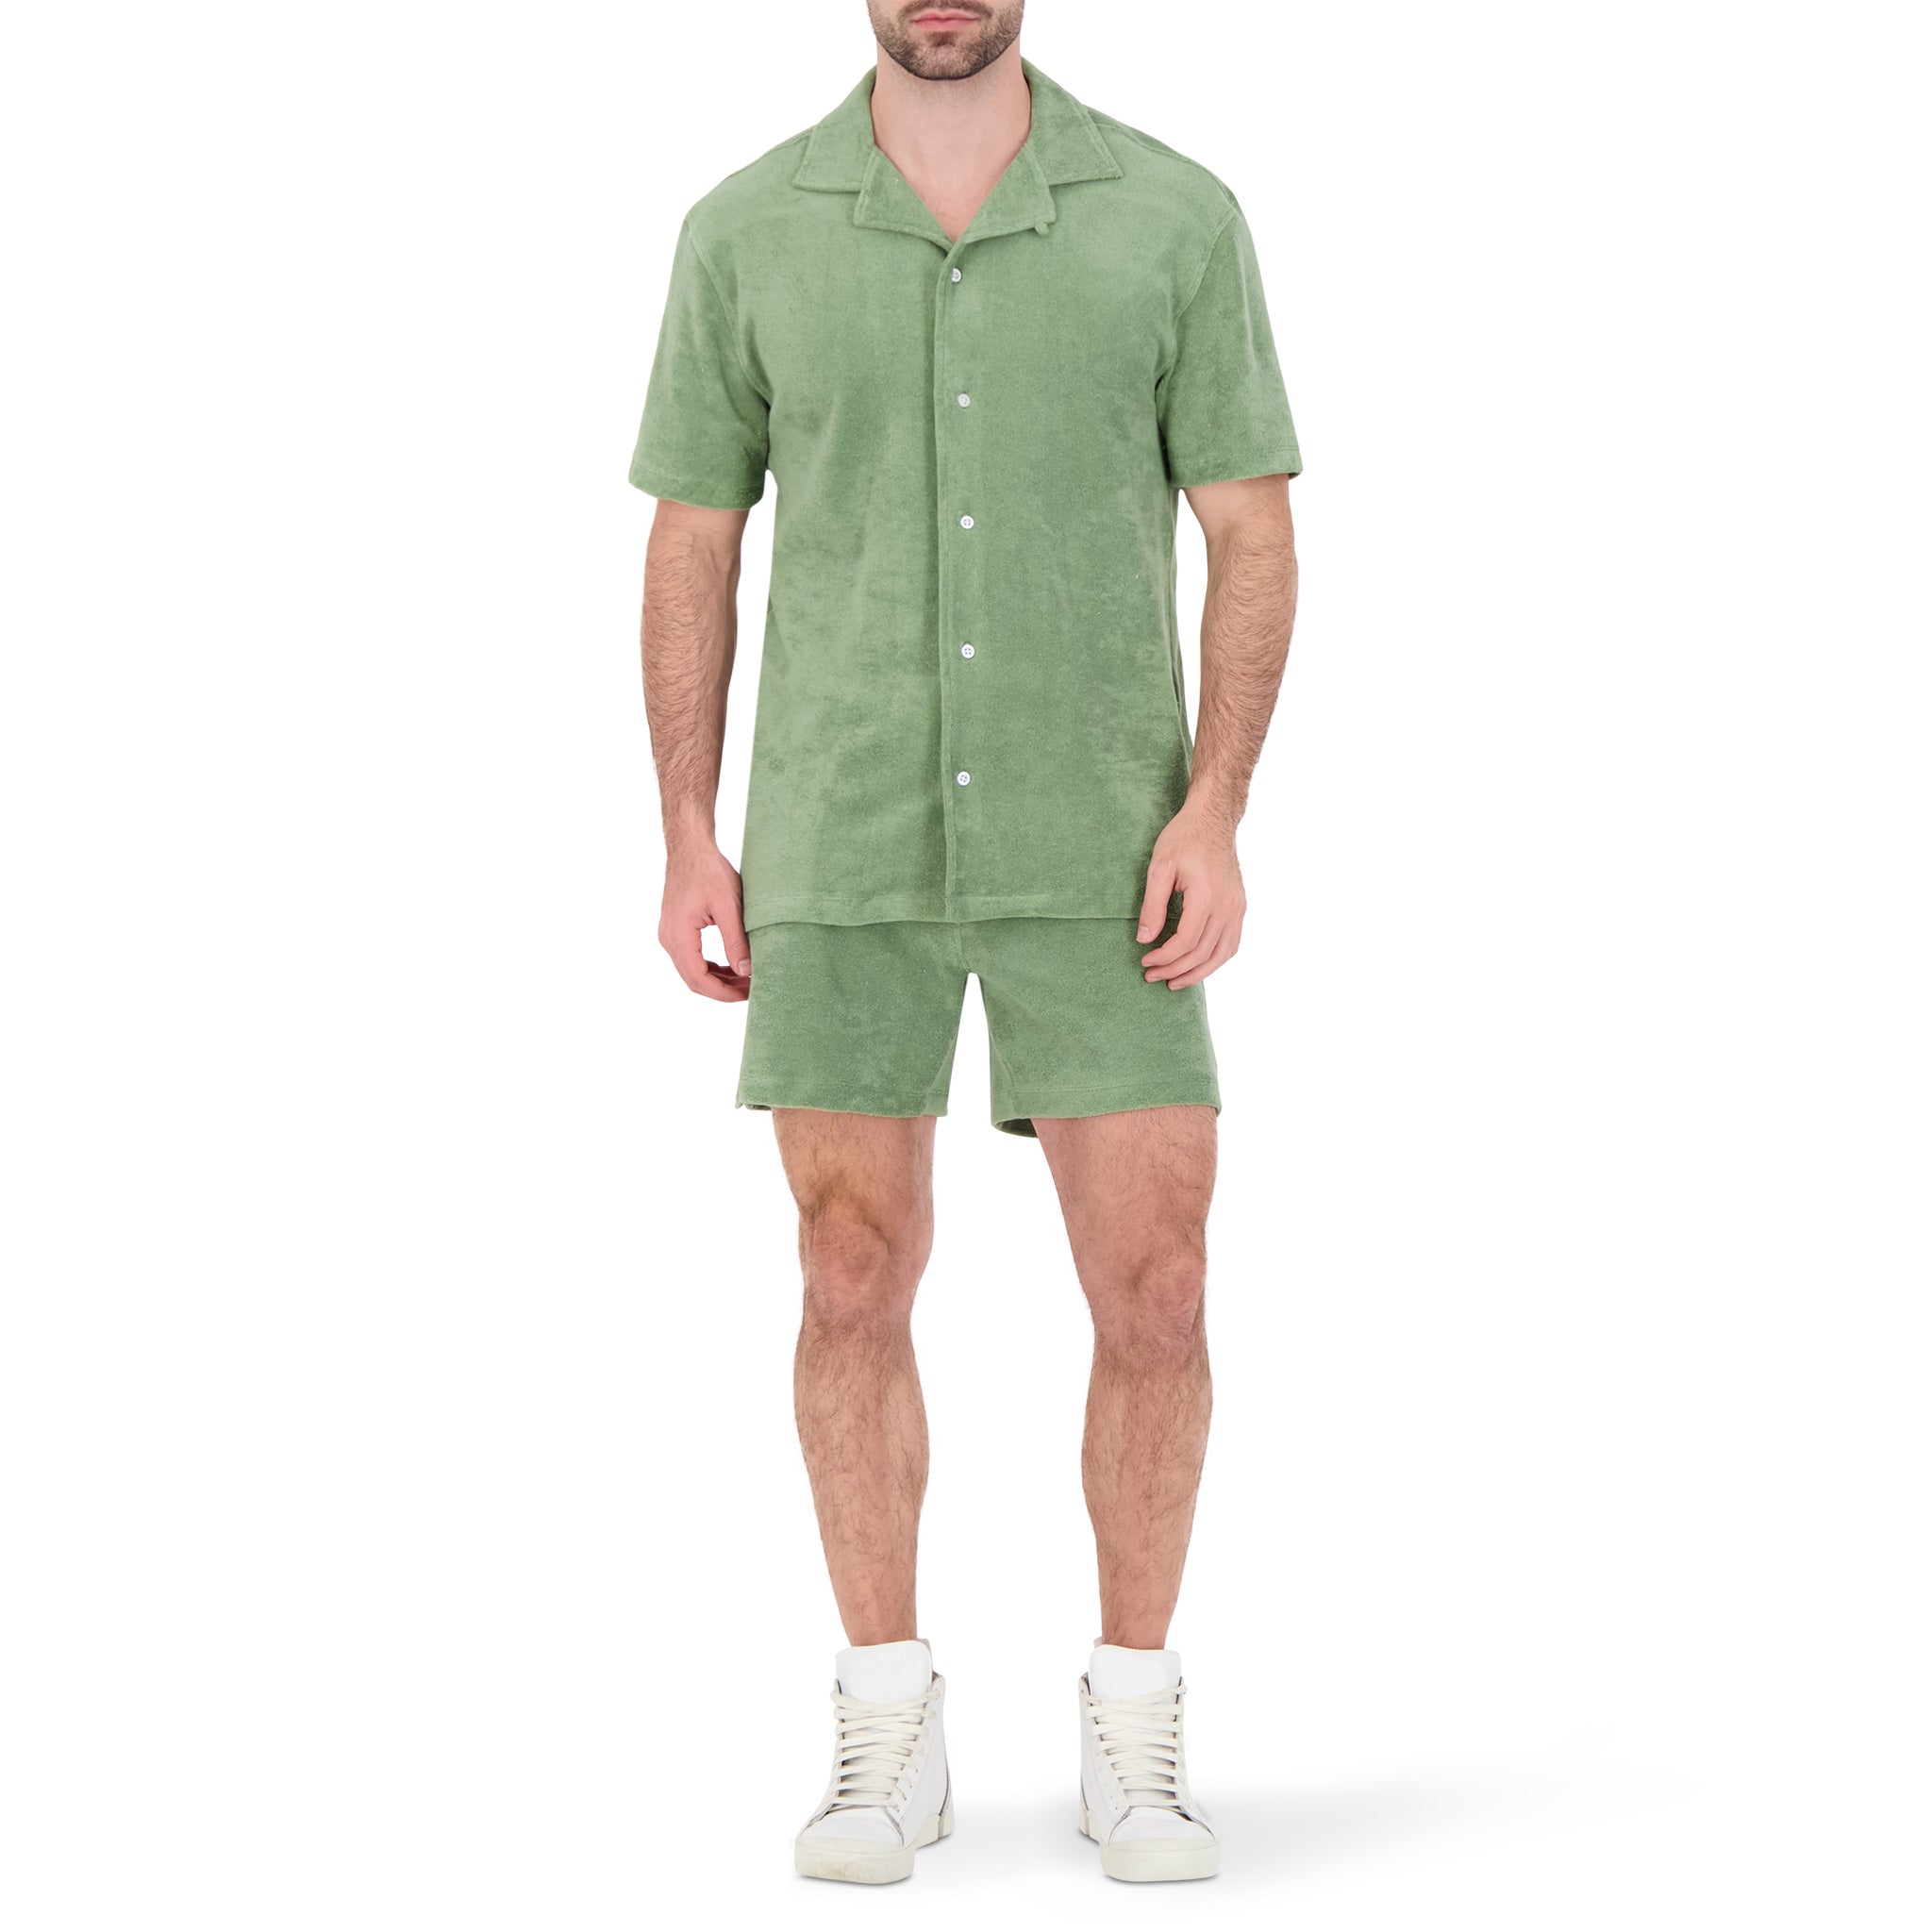 Terry Cloth Knit Shorts in Olive Green